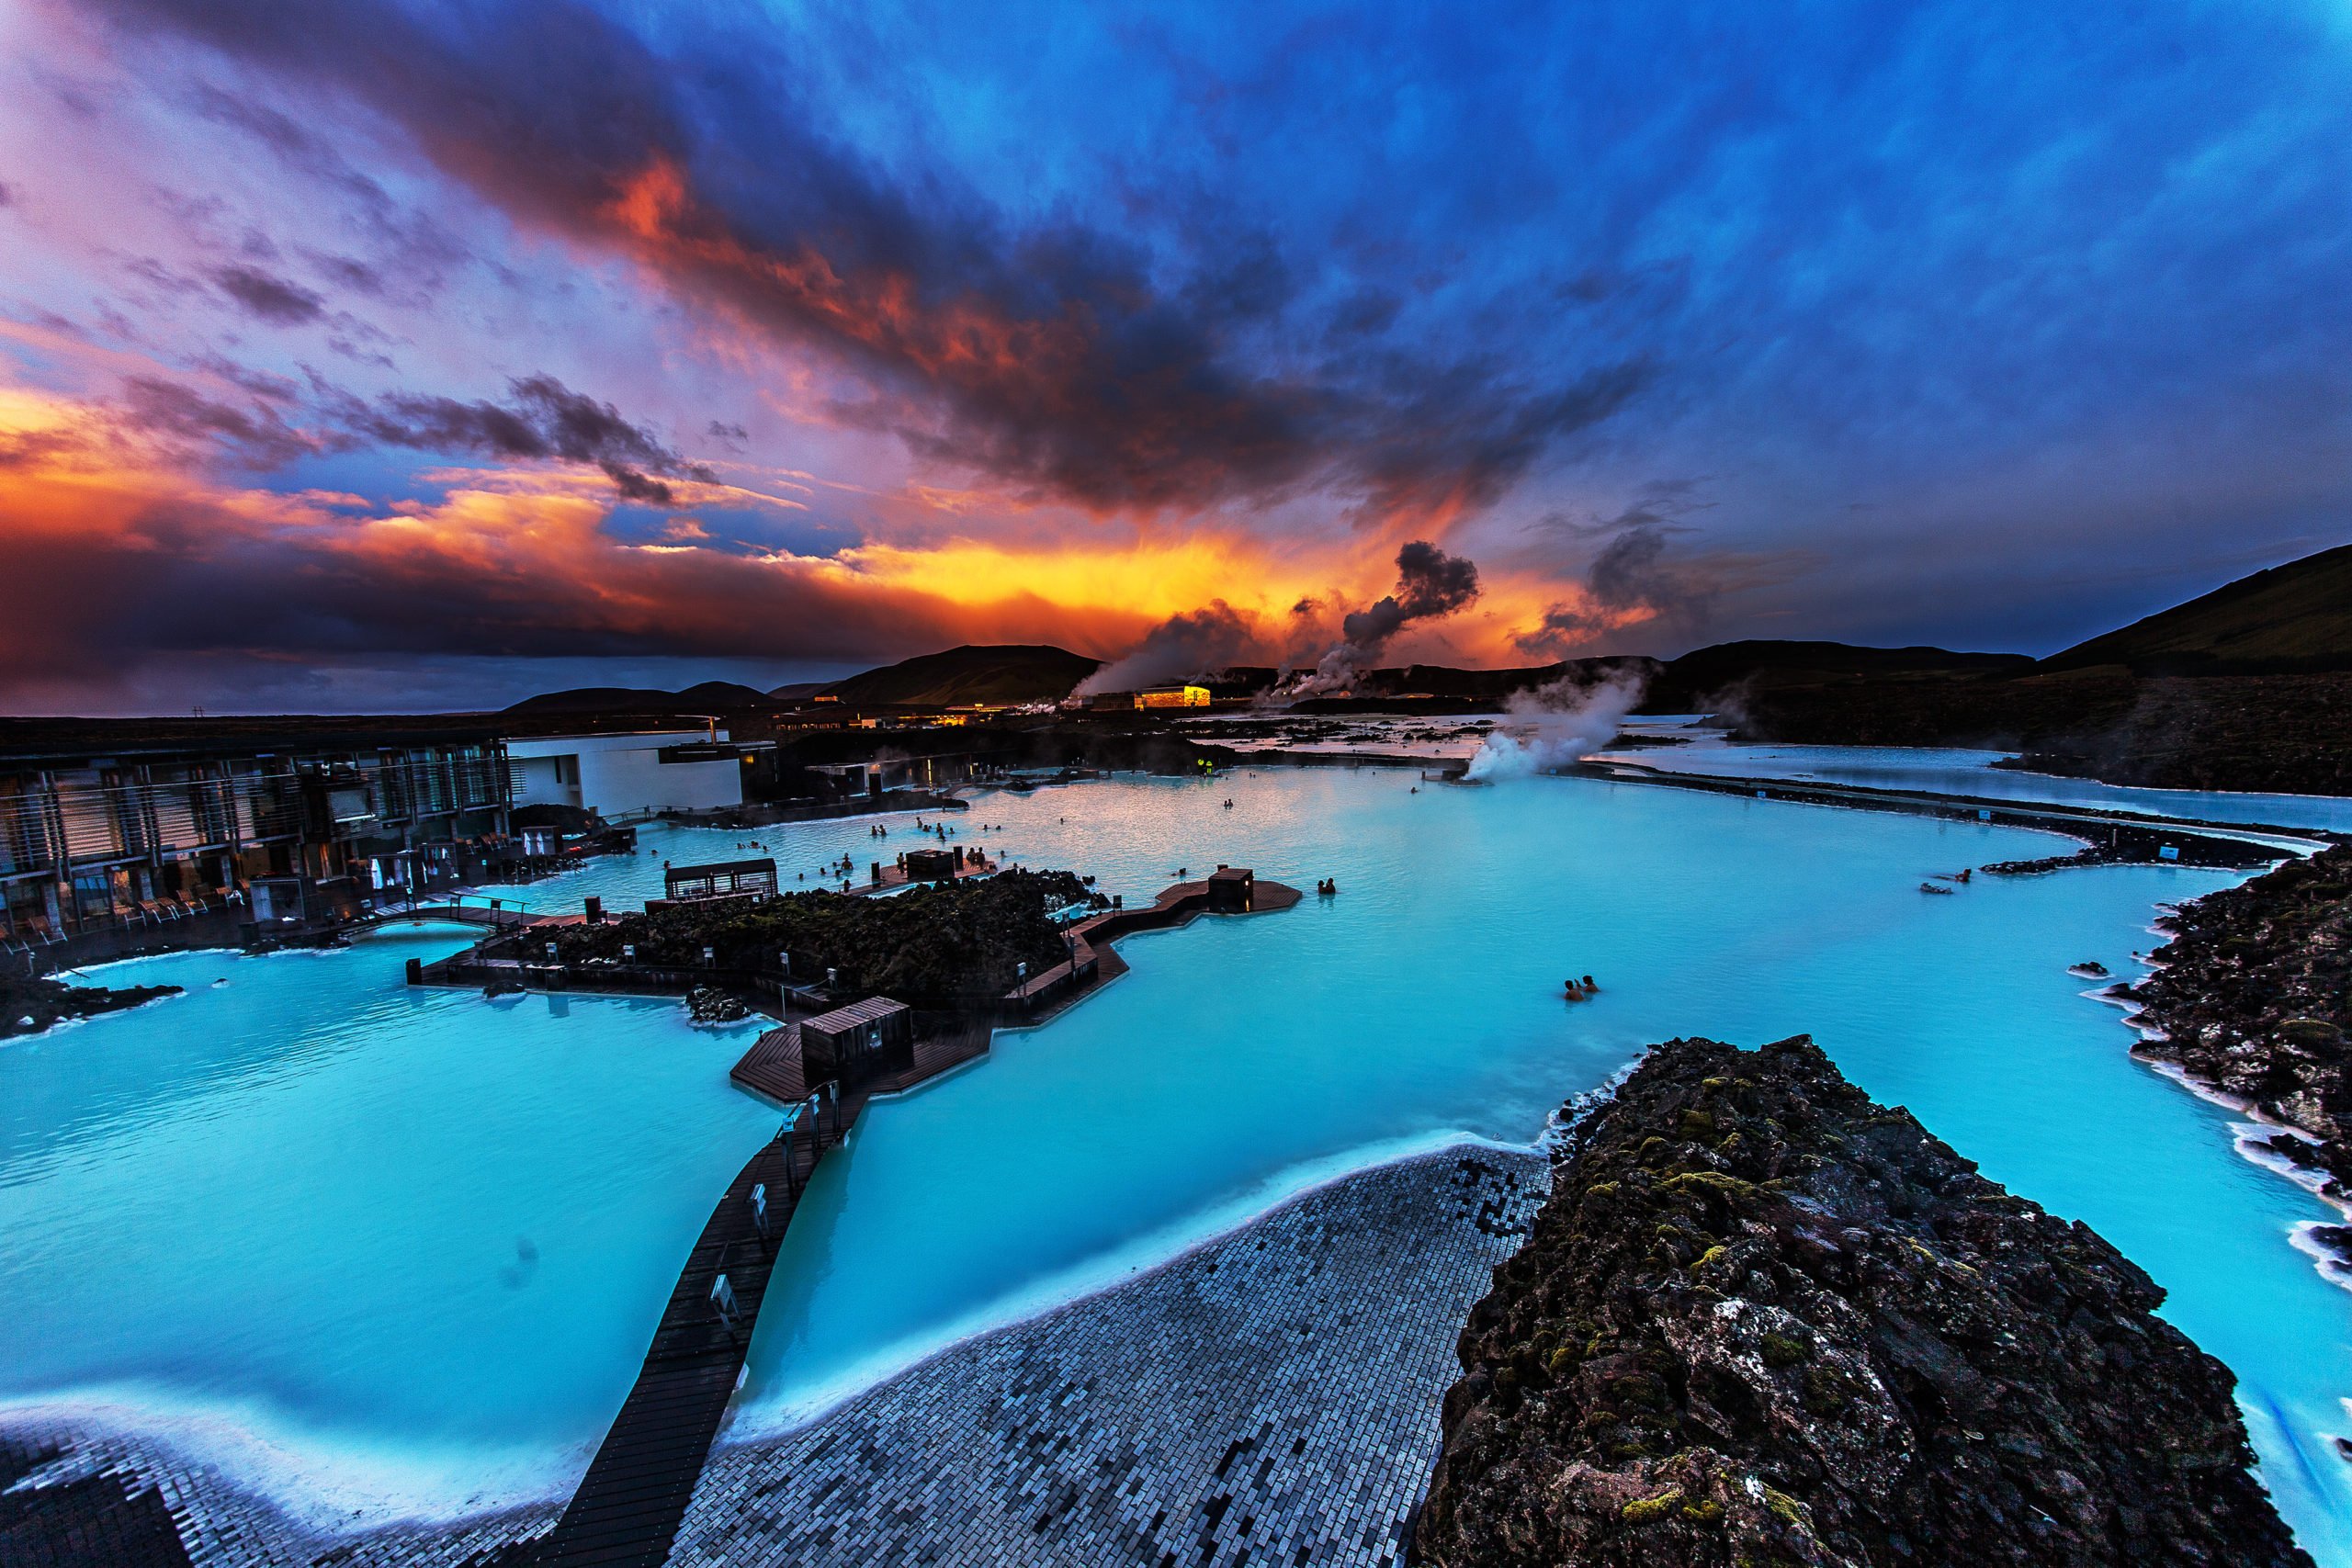 Experience The Blue Lagoon Unique Atmosphere And Silica Masks In Our Blue Lagoon & Northern Lights Tour